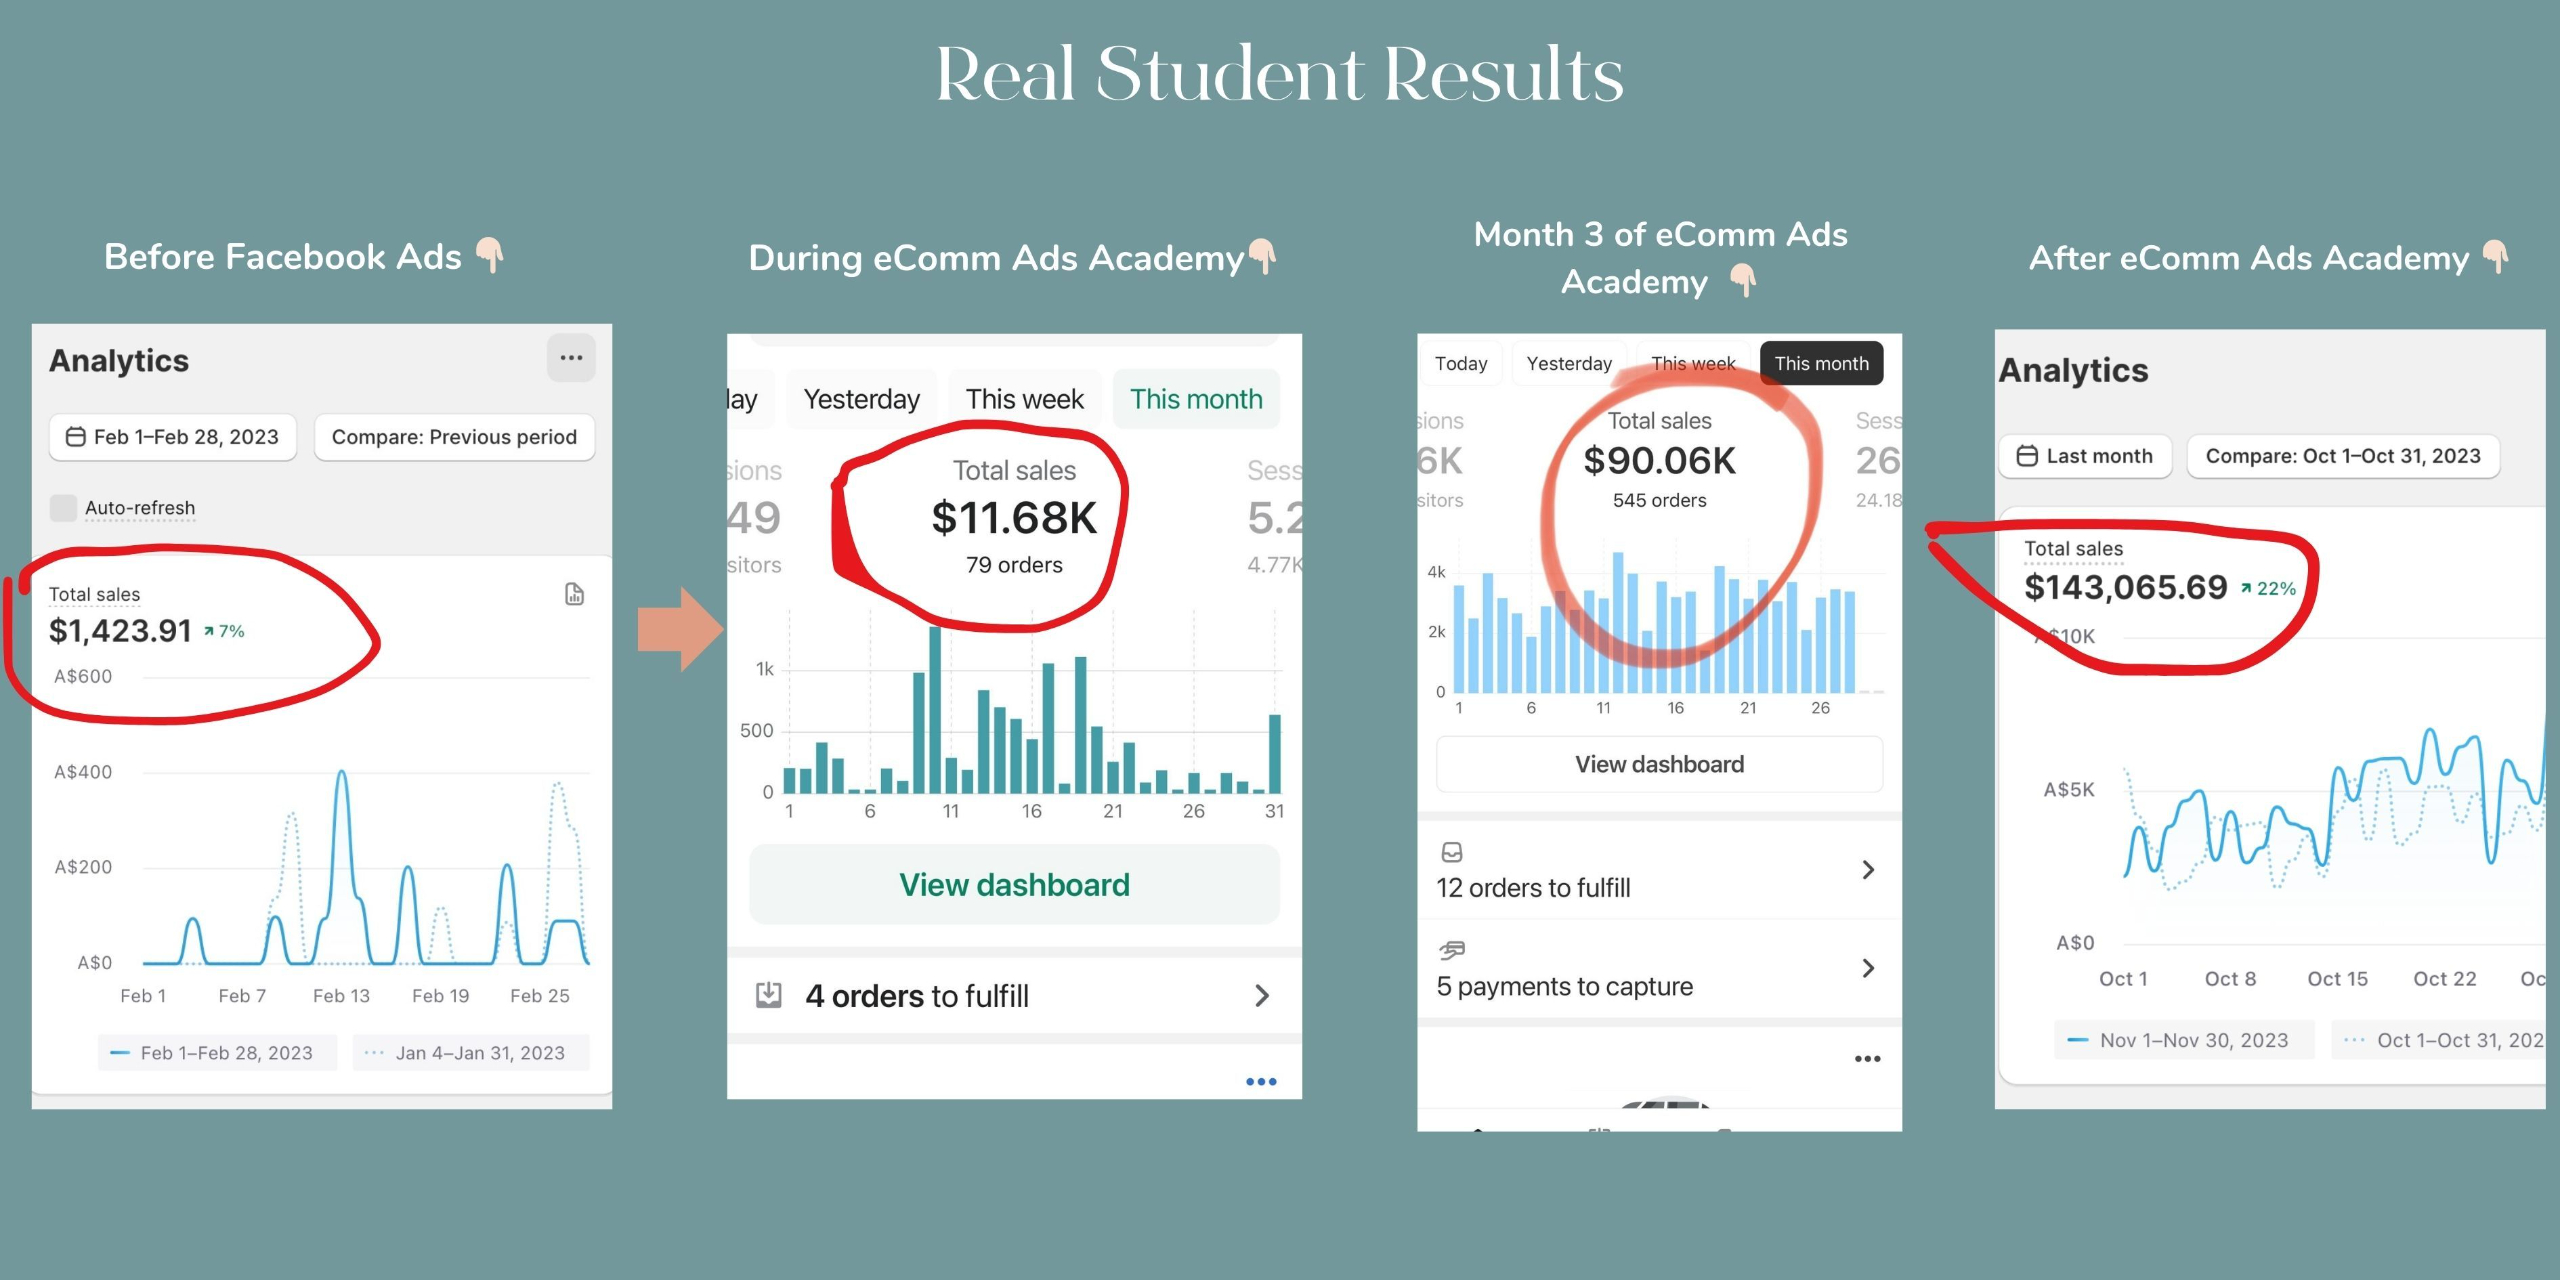 eComm Ads Academy By Jodie Minto - Free Download Course